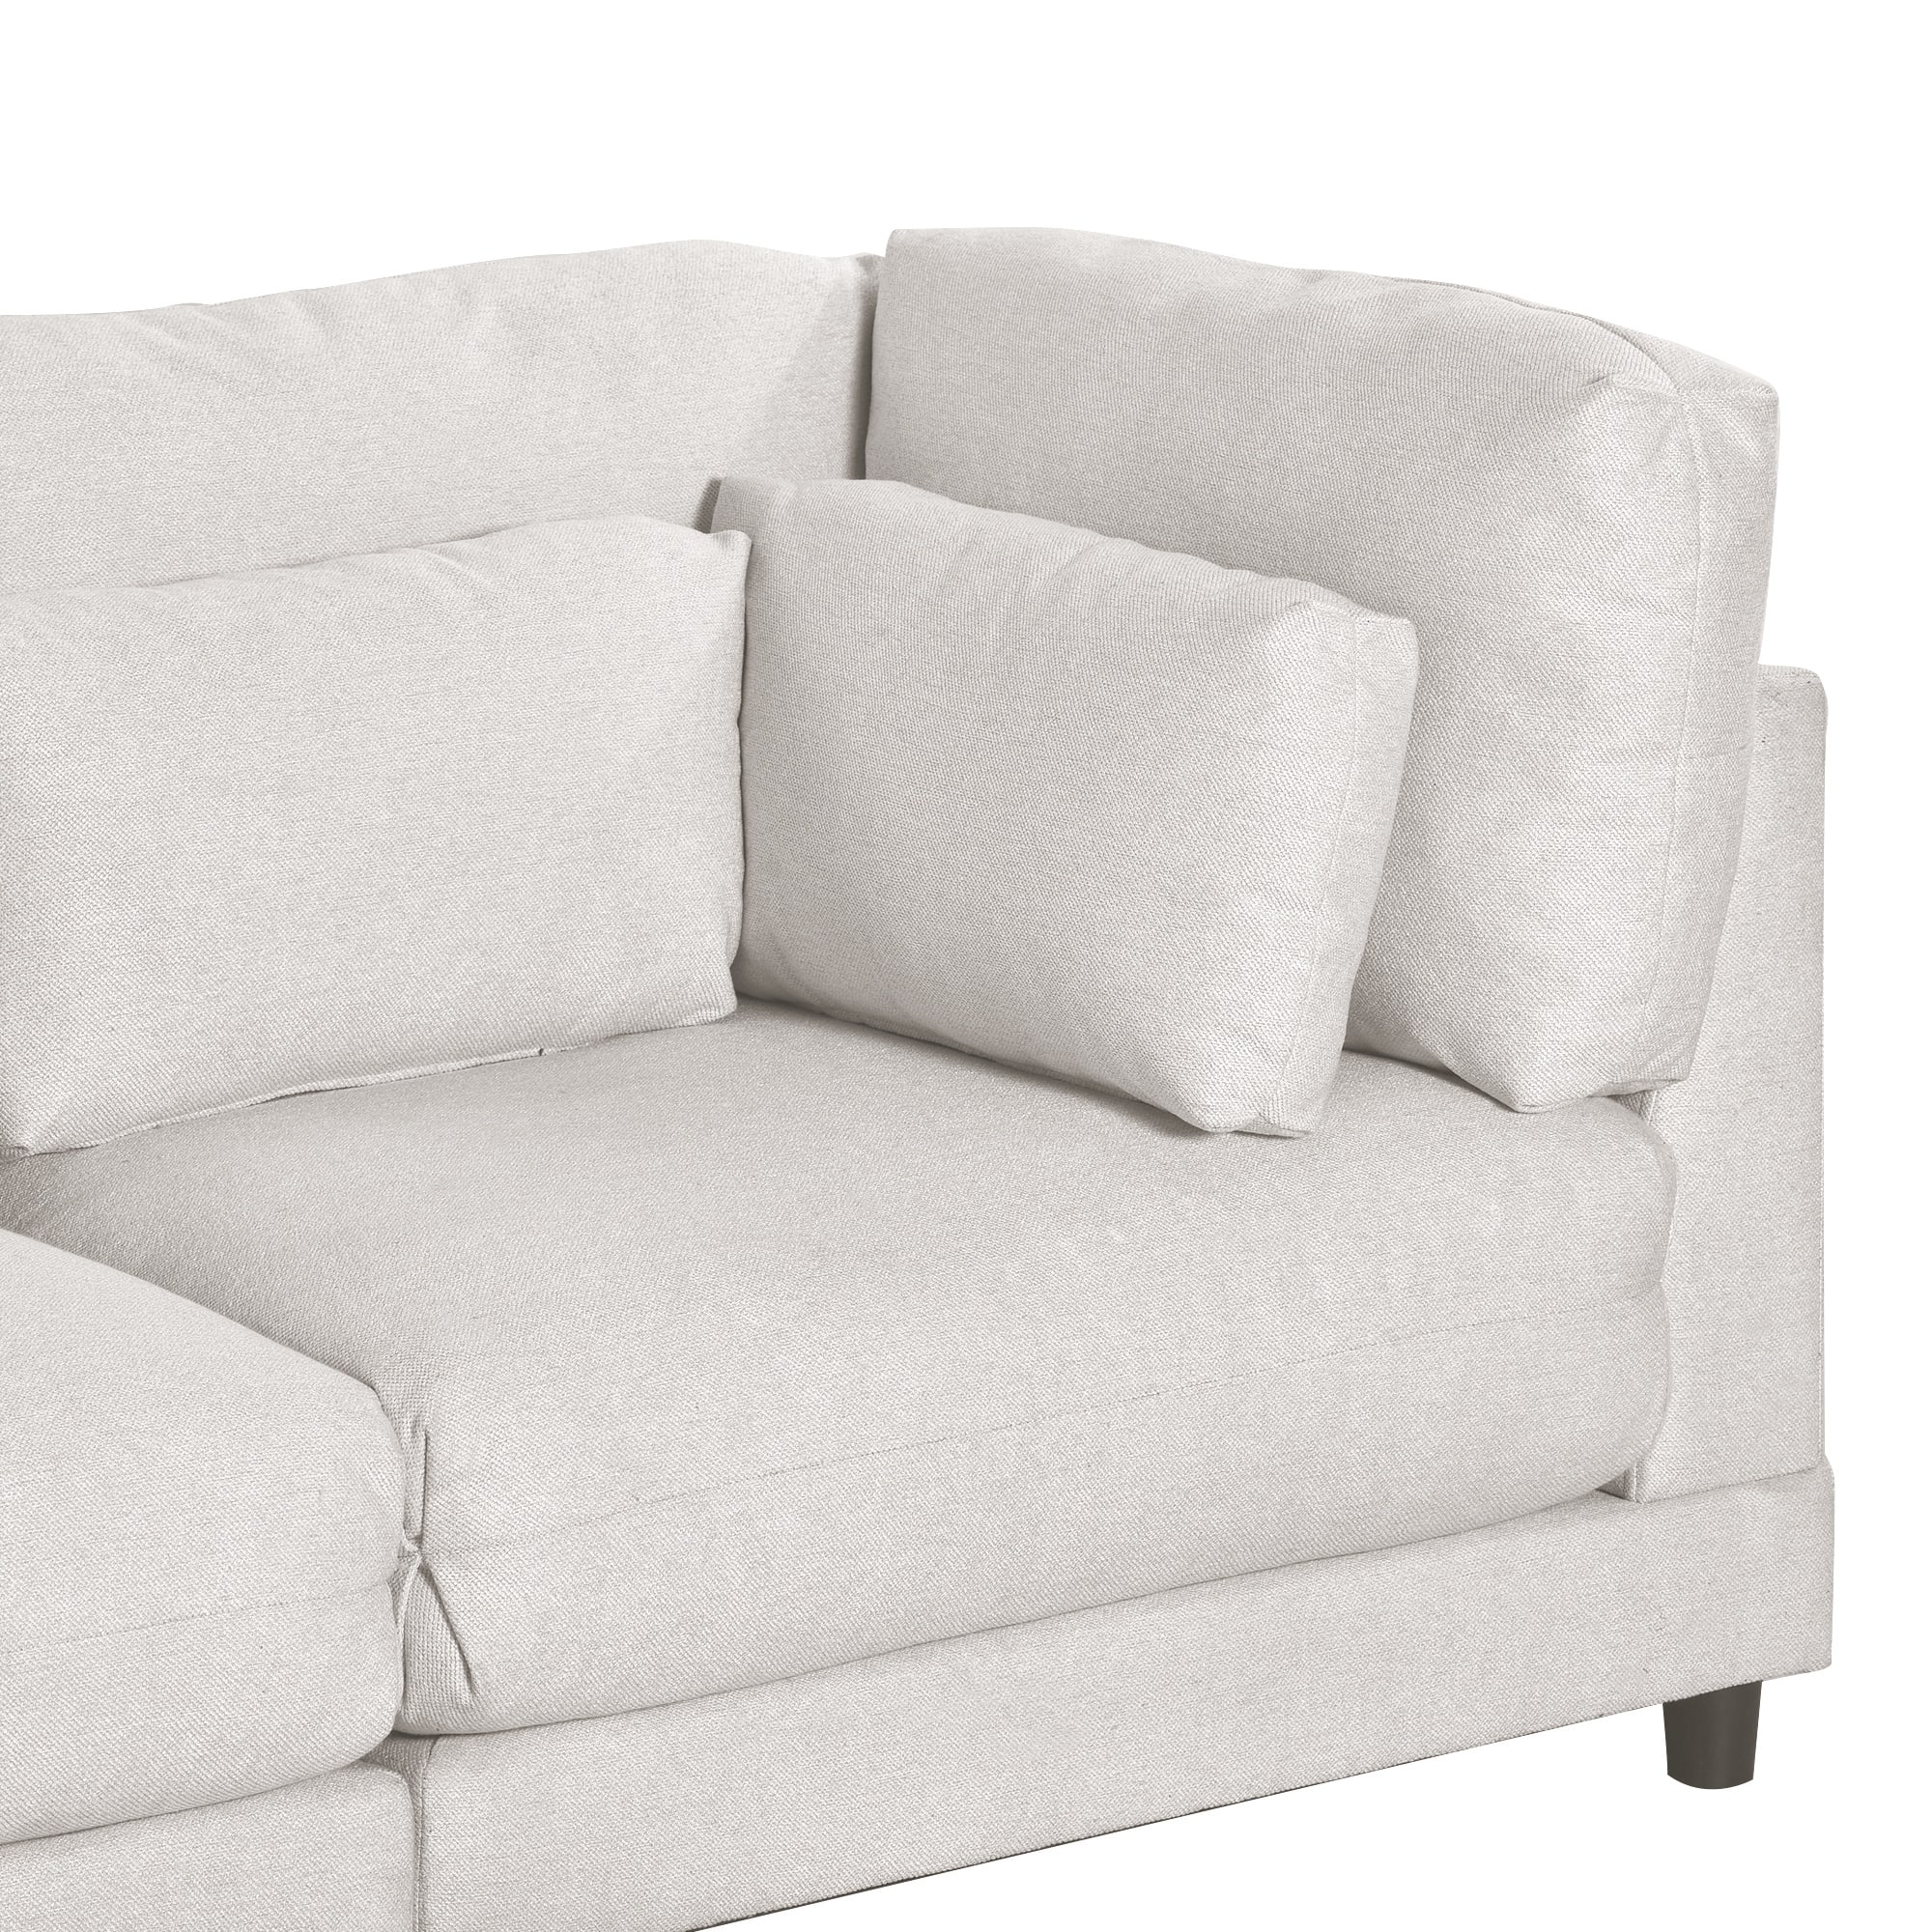 Nordic Convertible Sectional Couch Reversible Sleeper Sectional Sofa ...